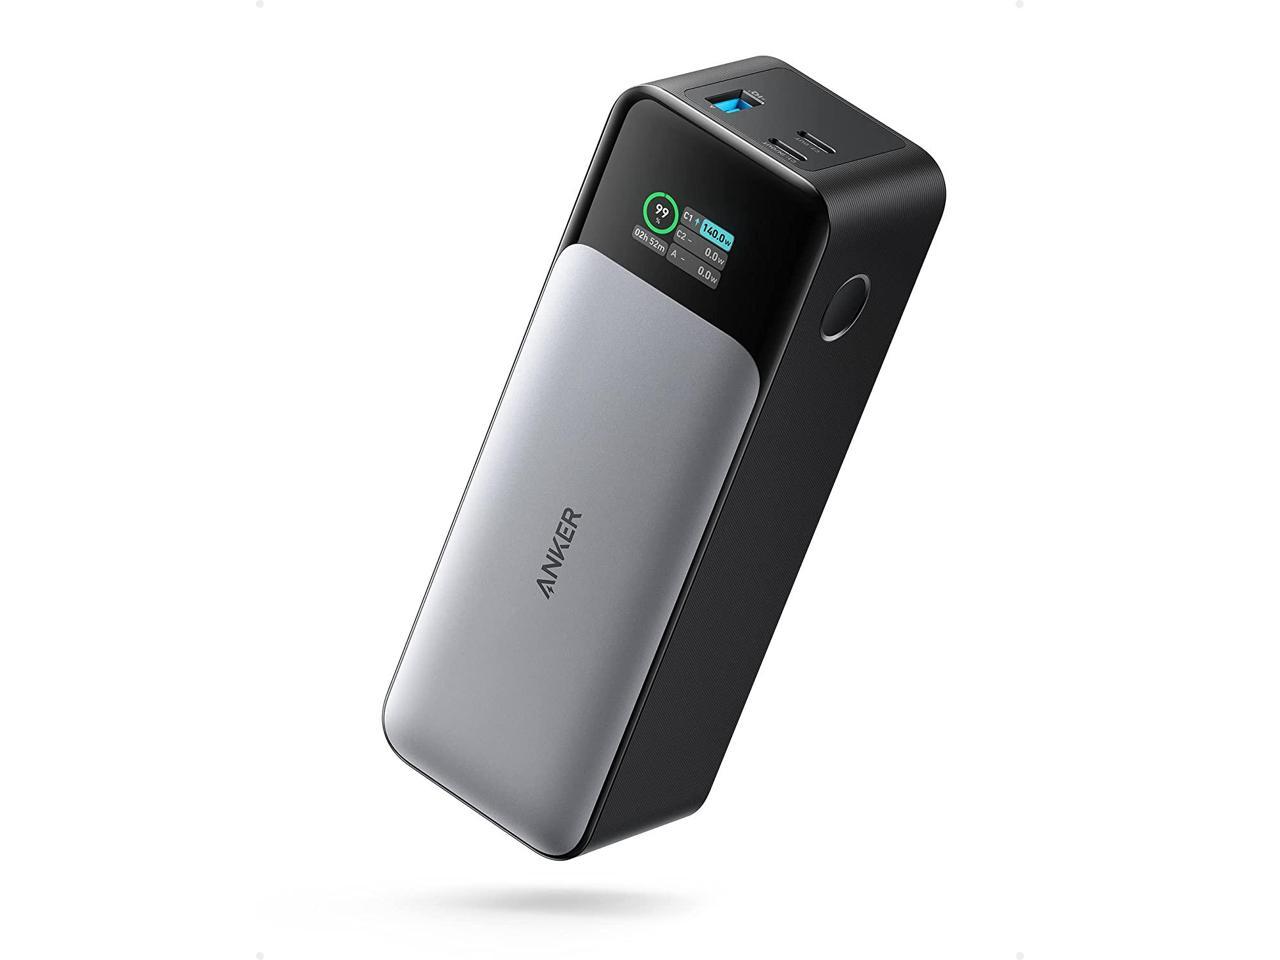 24,000mAh Anker 737 Power Bank with 140W Output $100